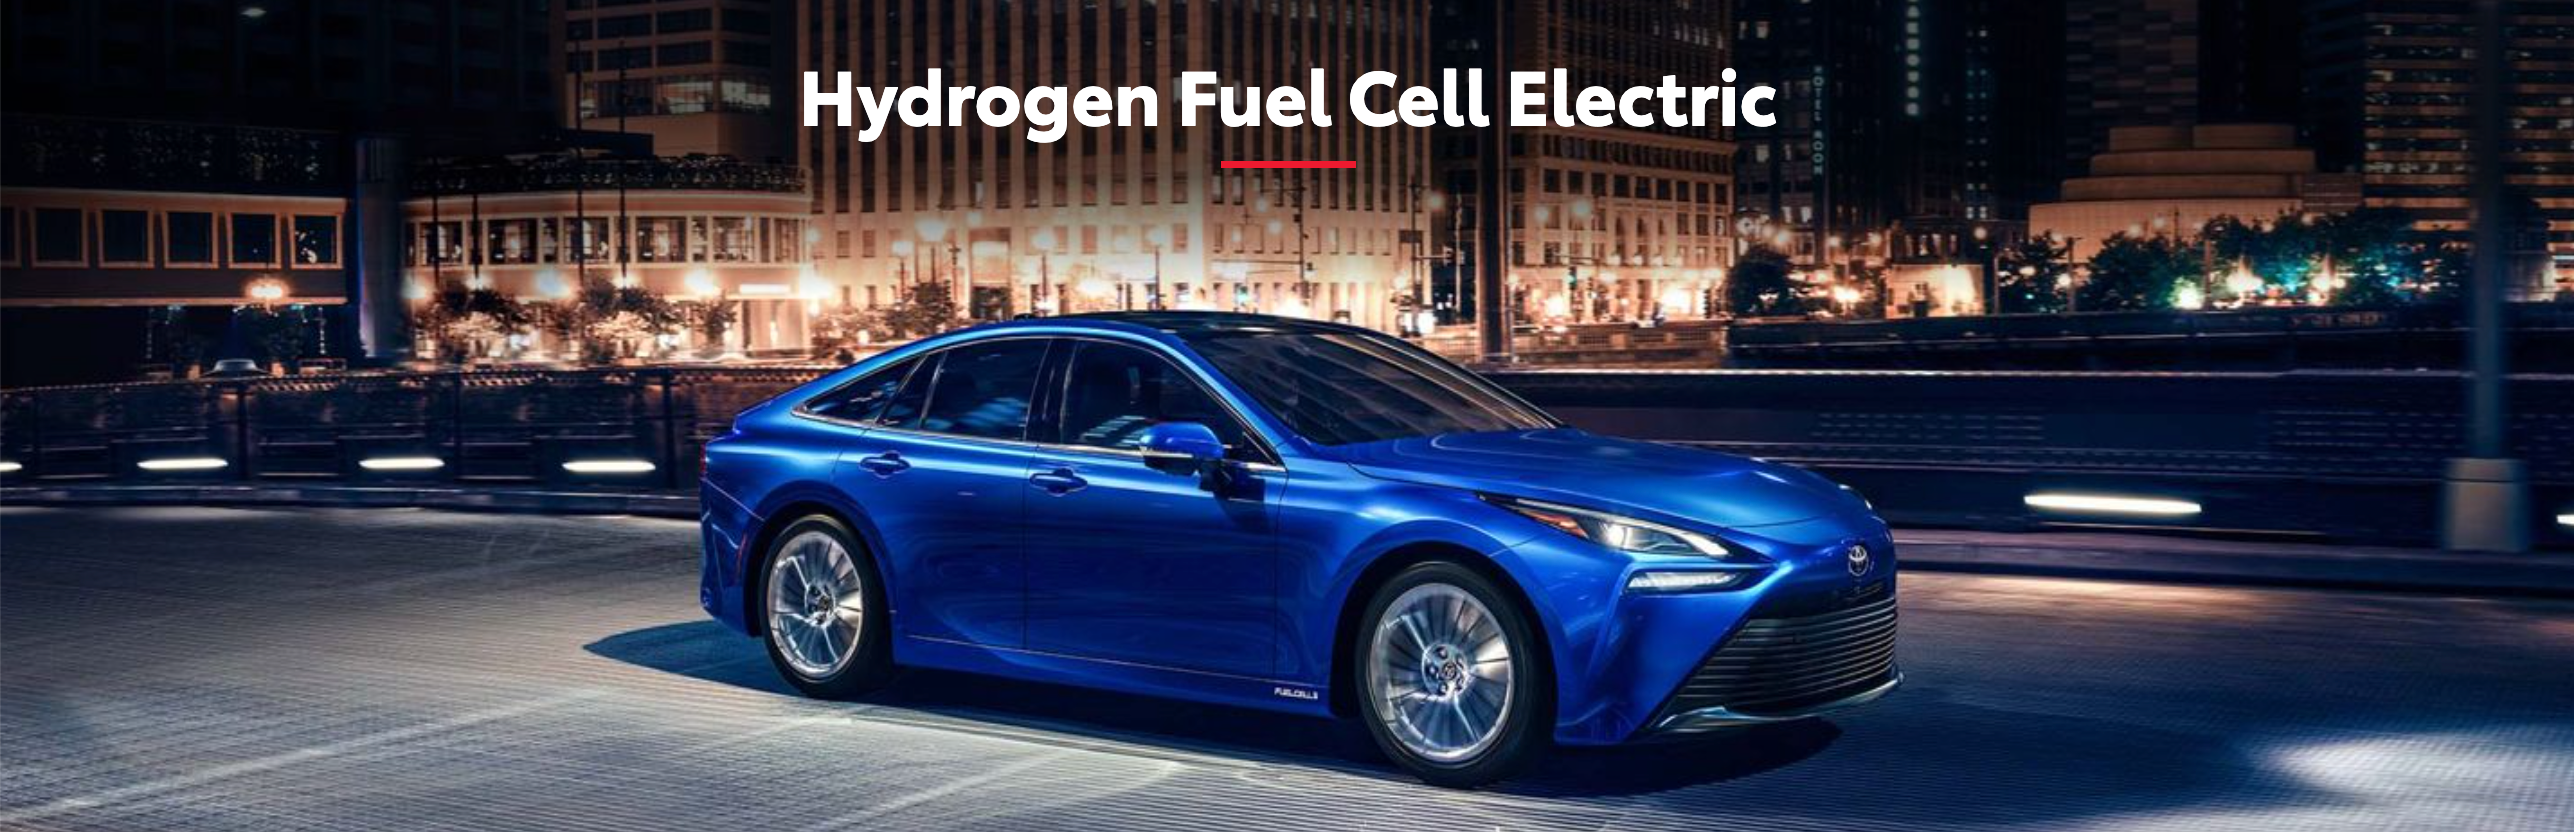 a hydrogen fuel cell electric Toyota parked in a city at night.